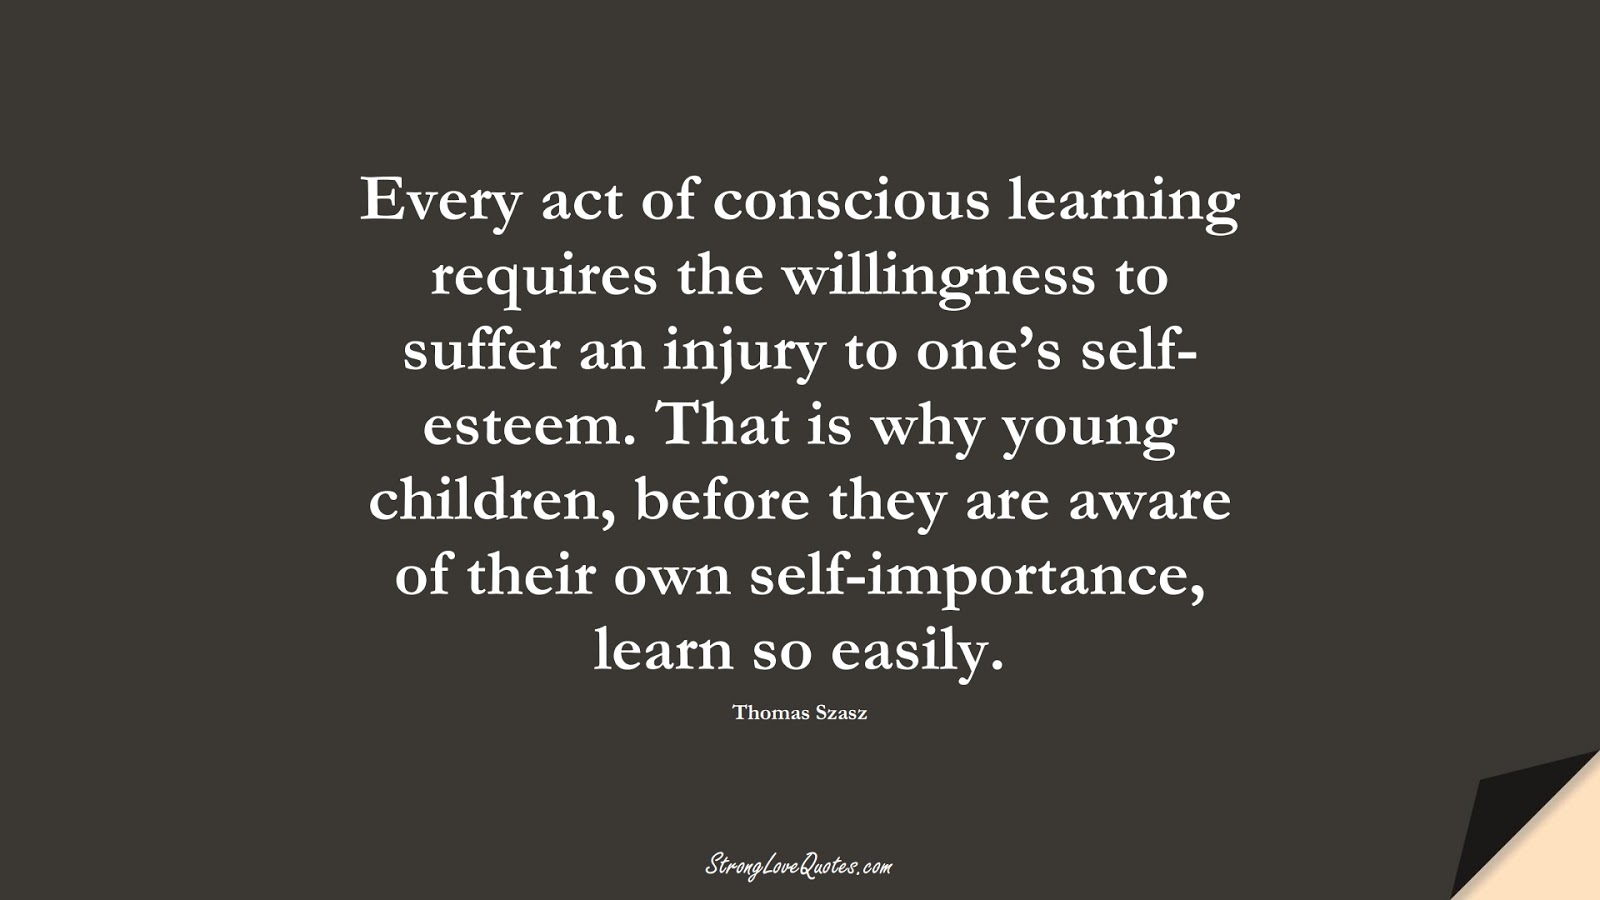 Every act of conscious learning requires the willingness to suffer an injury to one’s self-esteem. That is why young children, before they are aware of their own self-importance, learn so easily. (Thomas Szasz);  #EducationQuotes